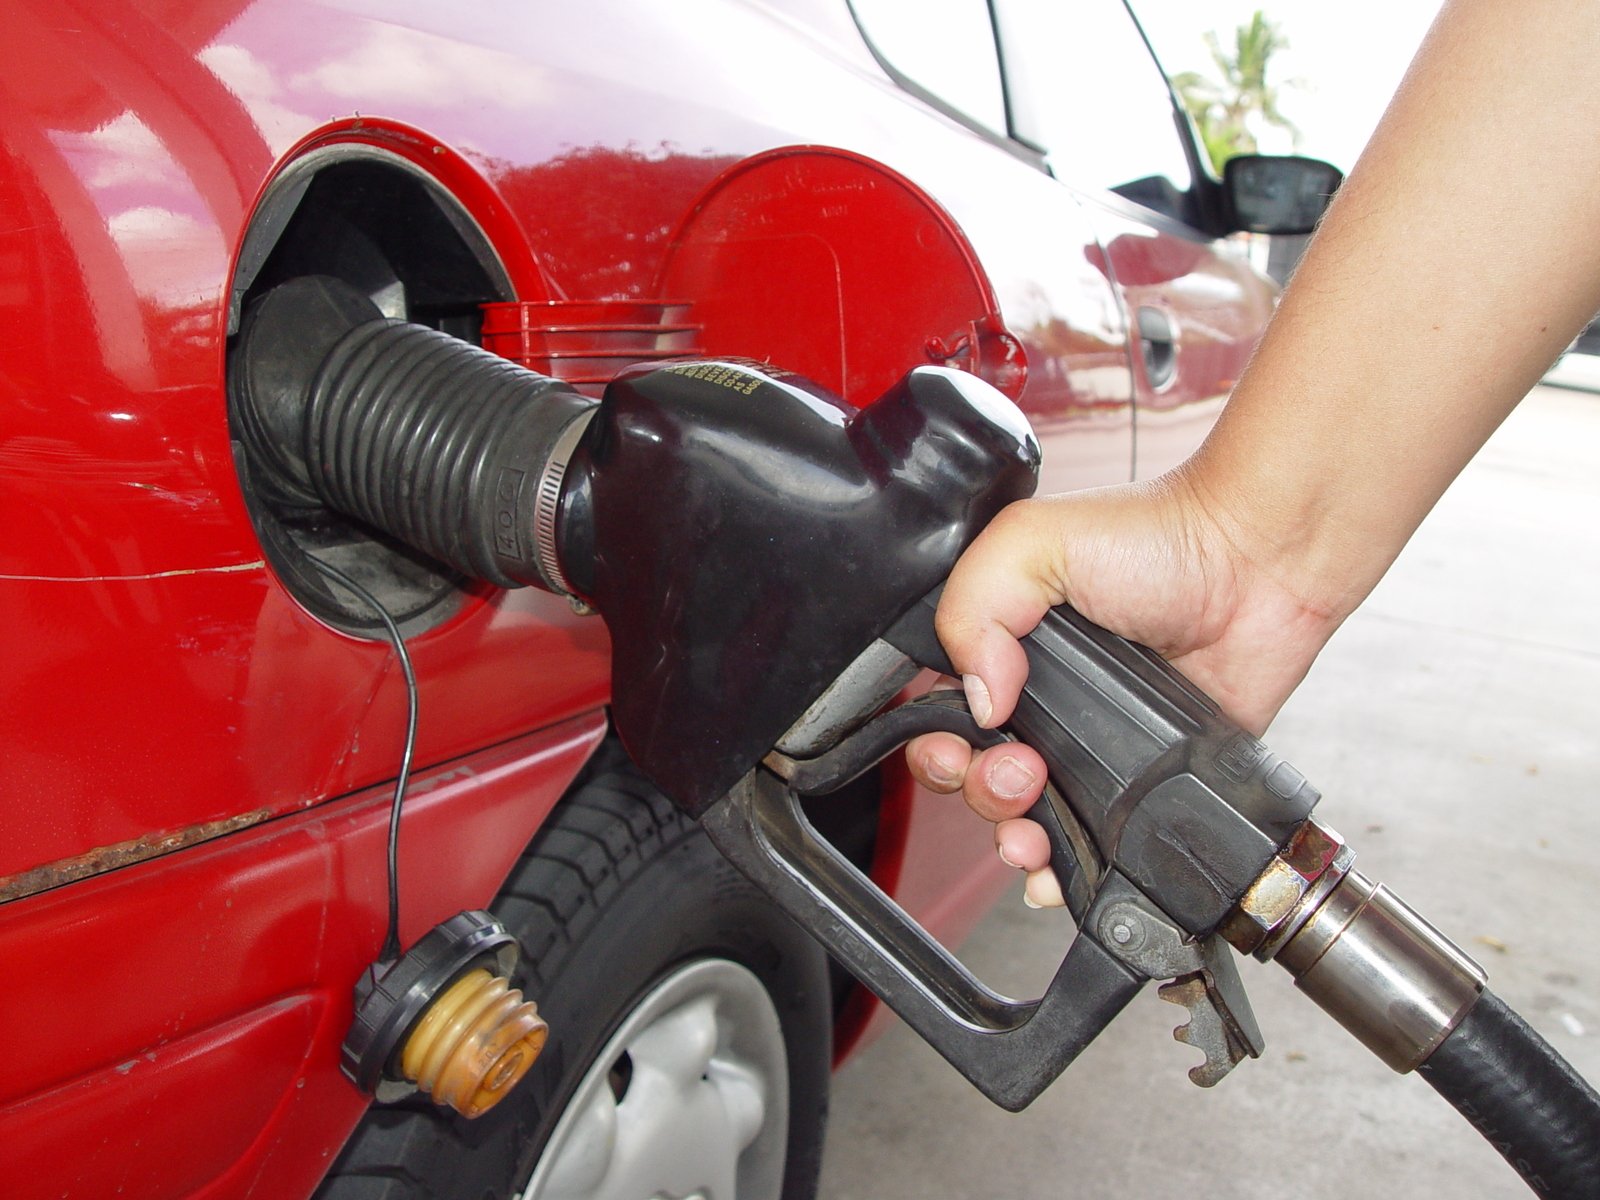 County Gas Sales Tax Cap to Take Effect: Gasoline Sales Tax Capped at $2 Through February 2023